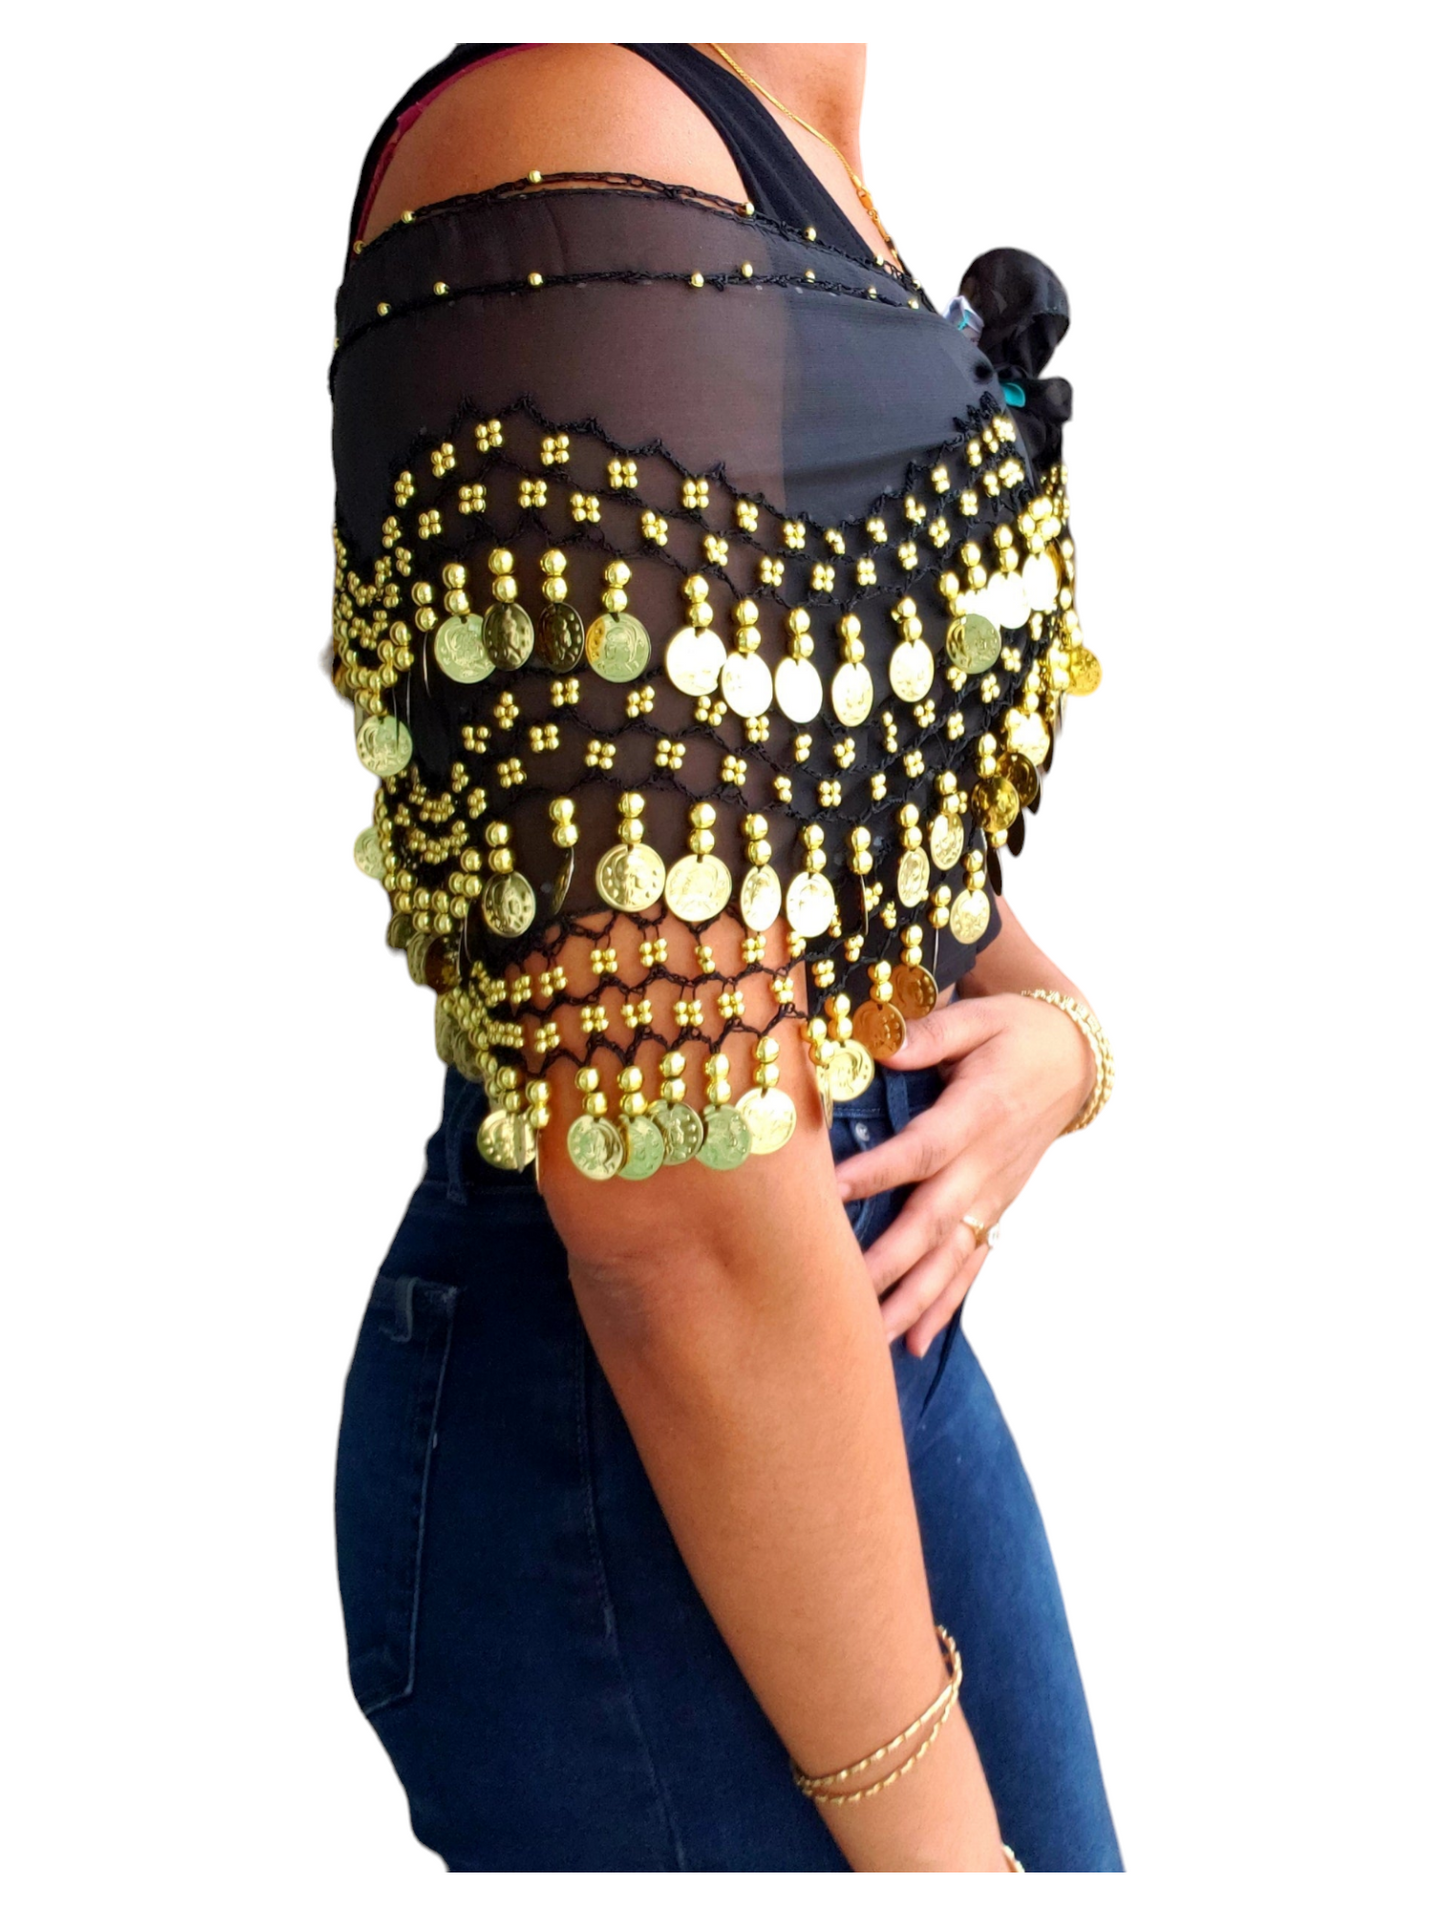 Belly Dance Hip Scarf With Coins / Skirt Sash Costume